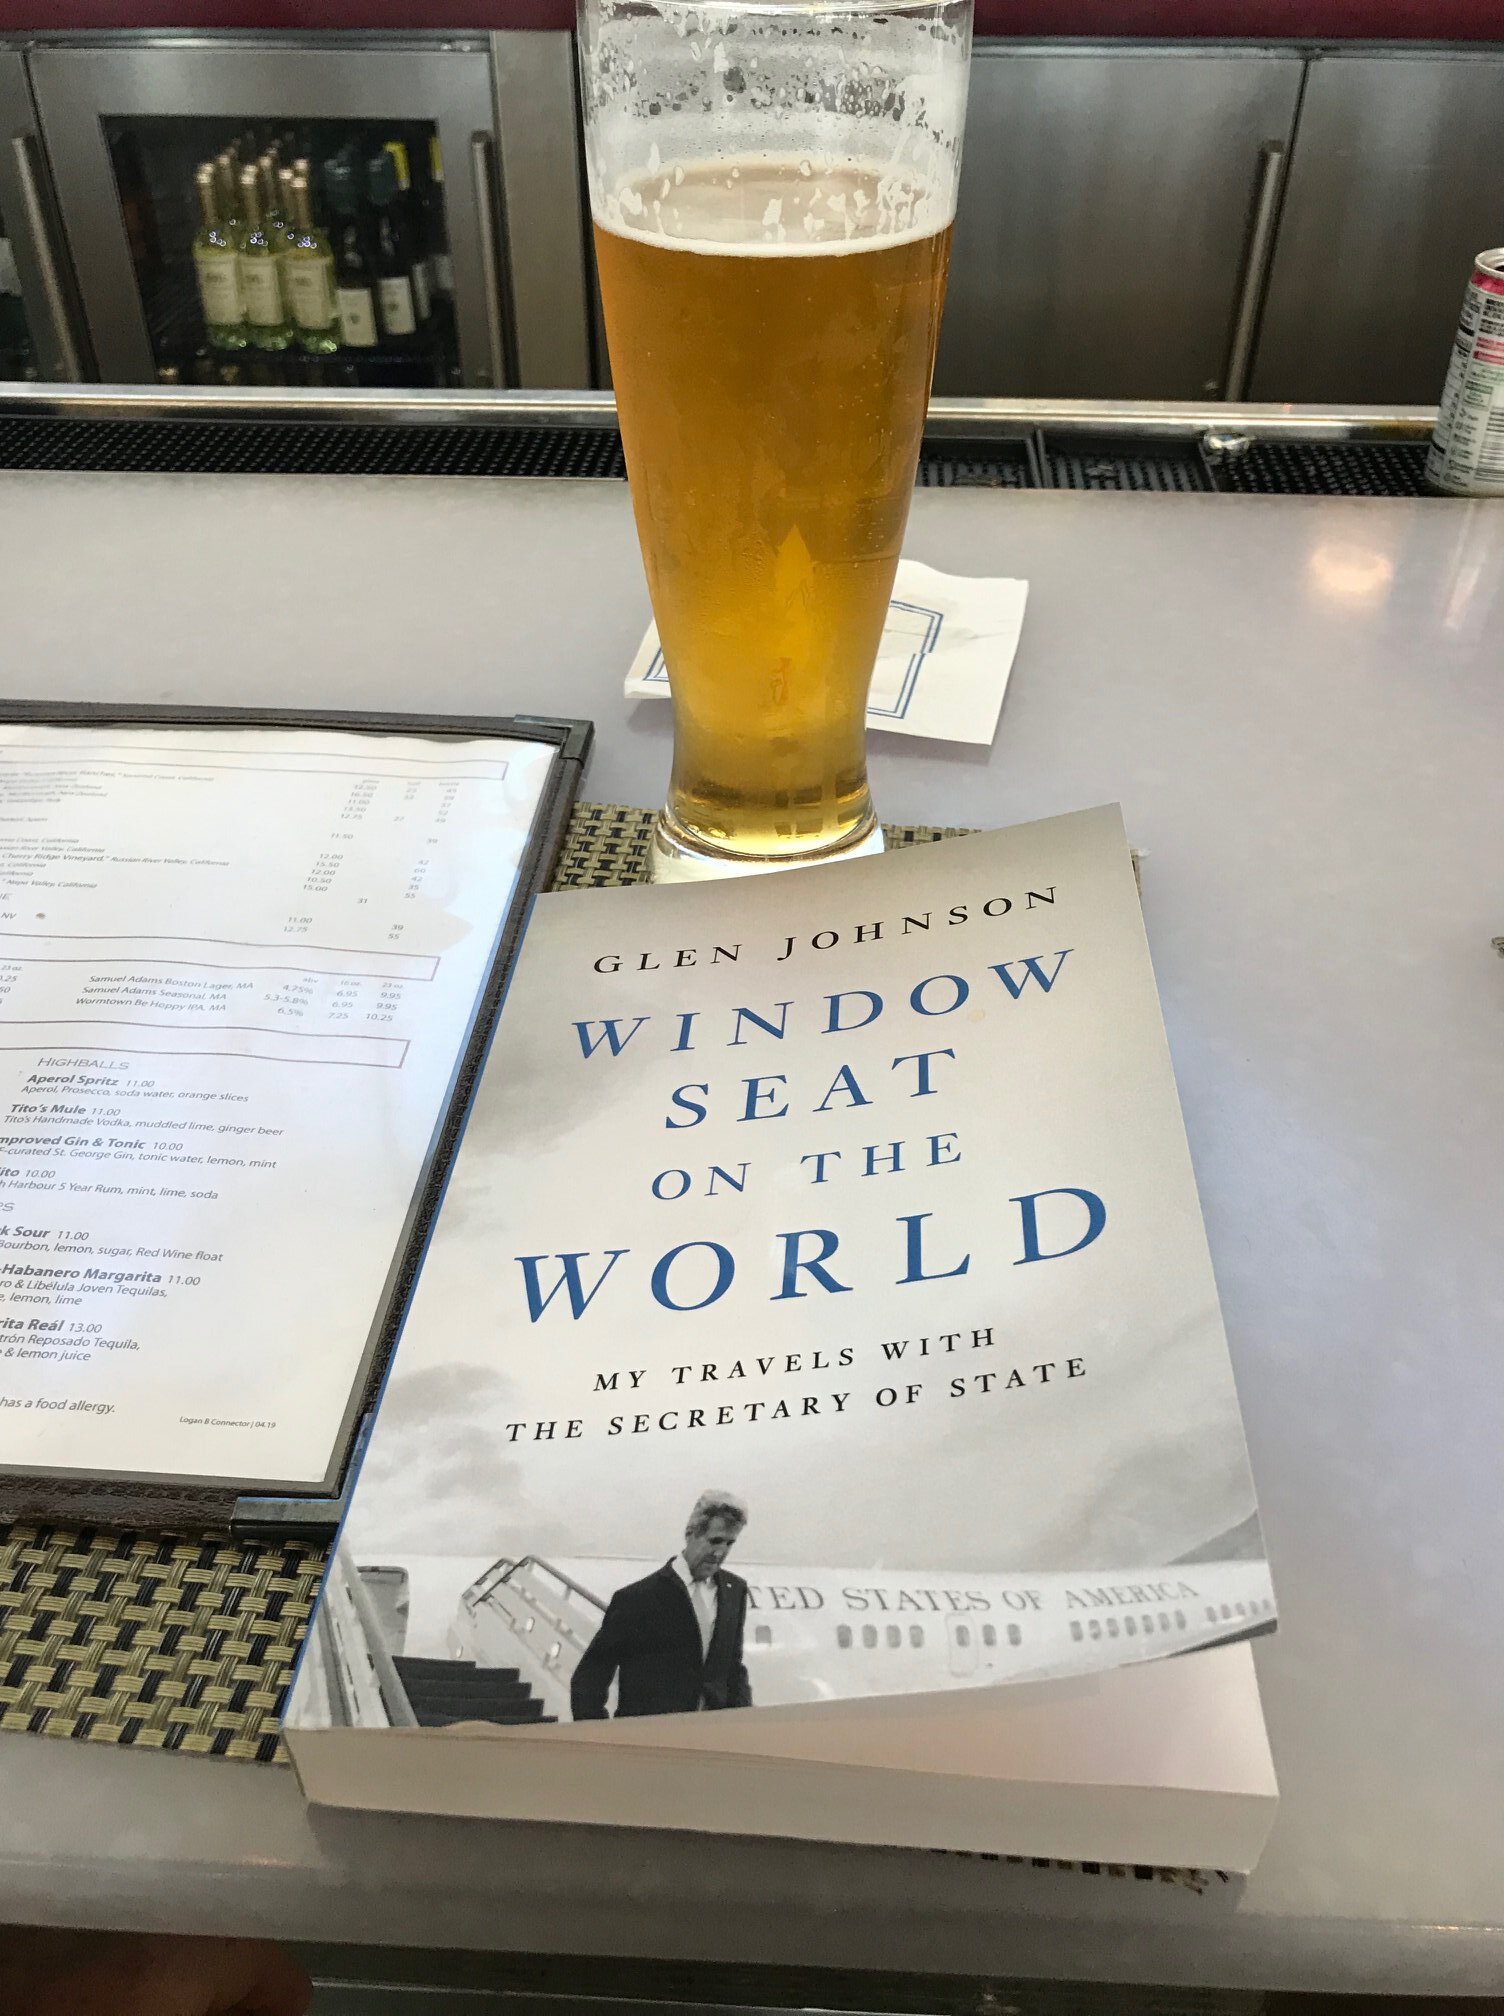  Our friend Eric Josephs helps sell copies to his fellow patrons as he awaits a flight at Logan Airport in Boston. 